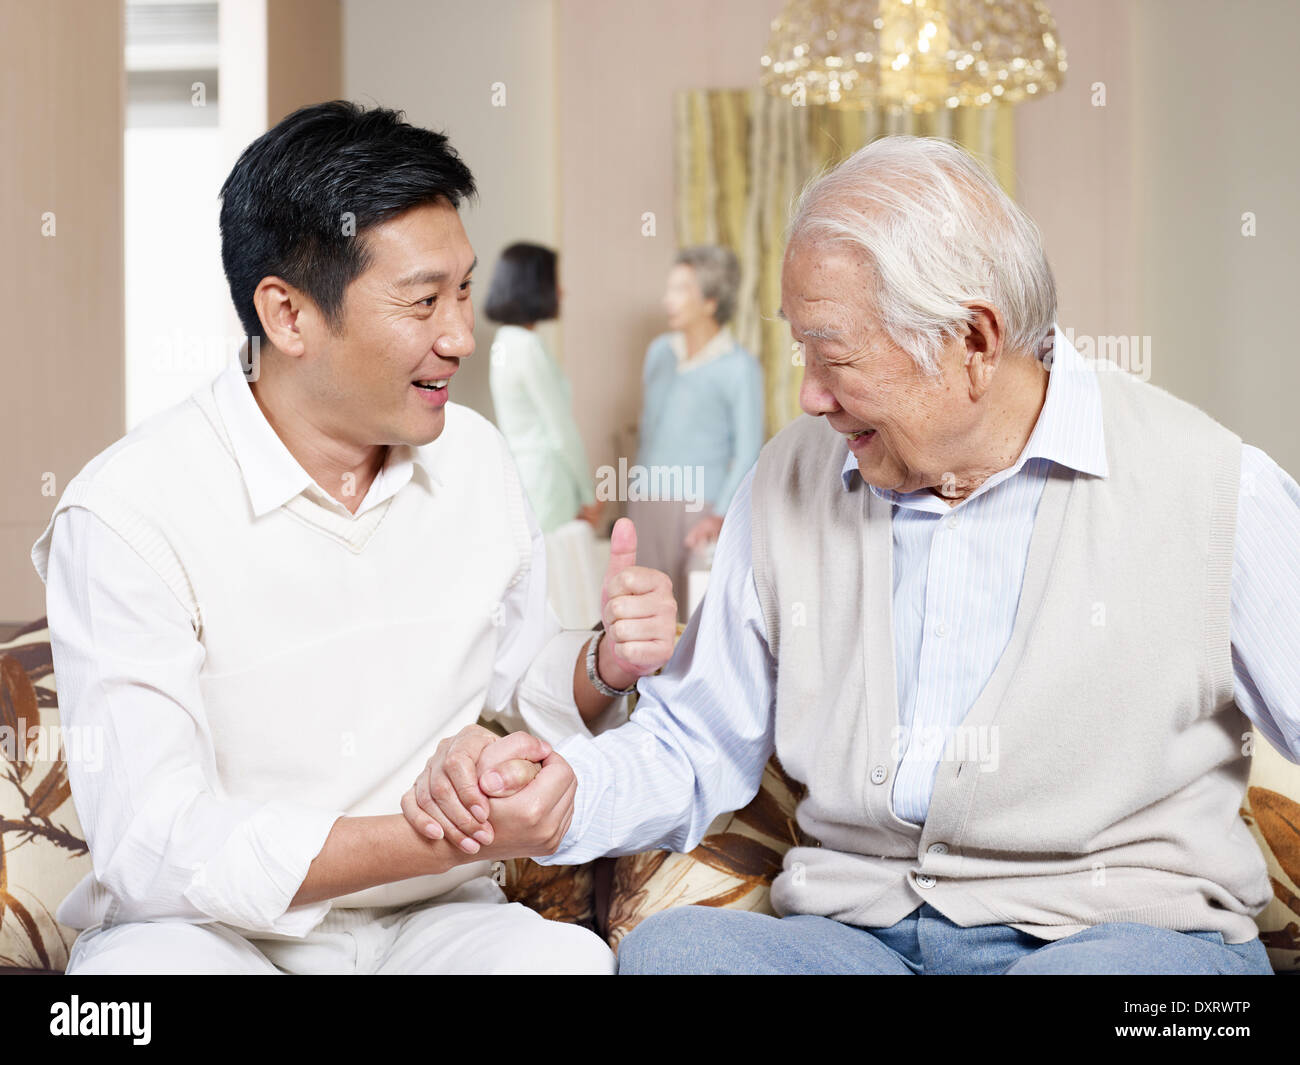 senior father and adult son chatting Stock Photo